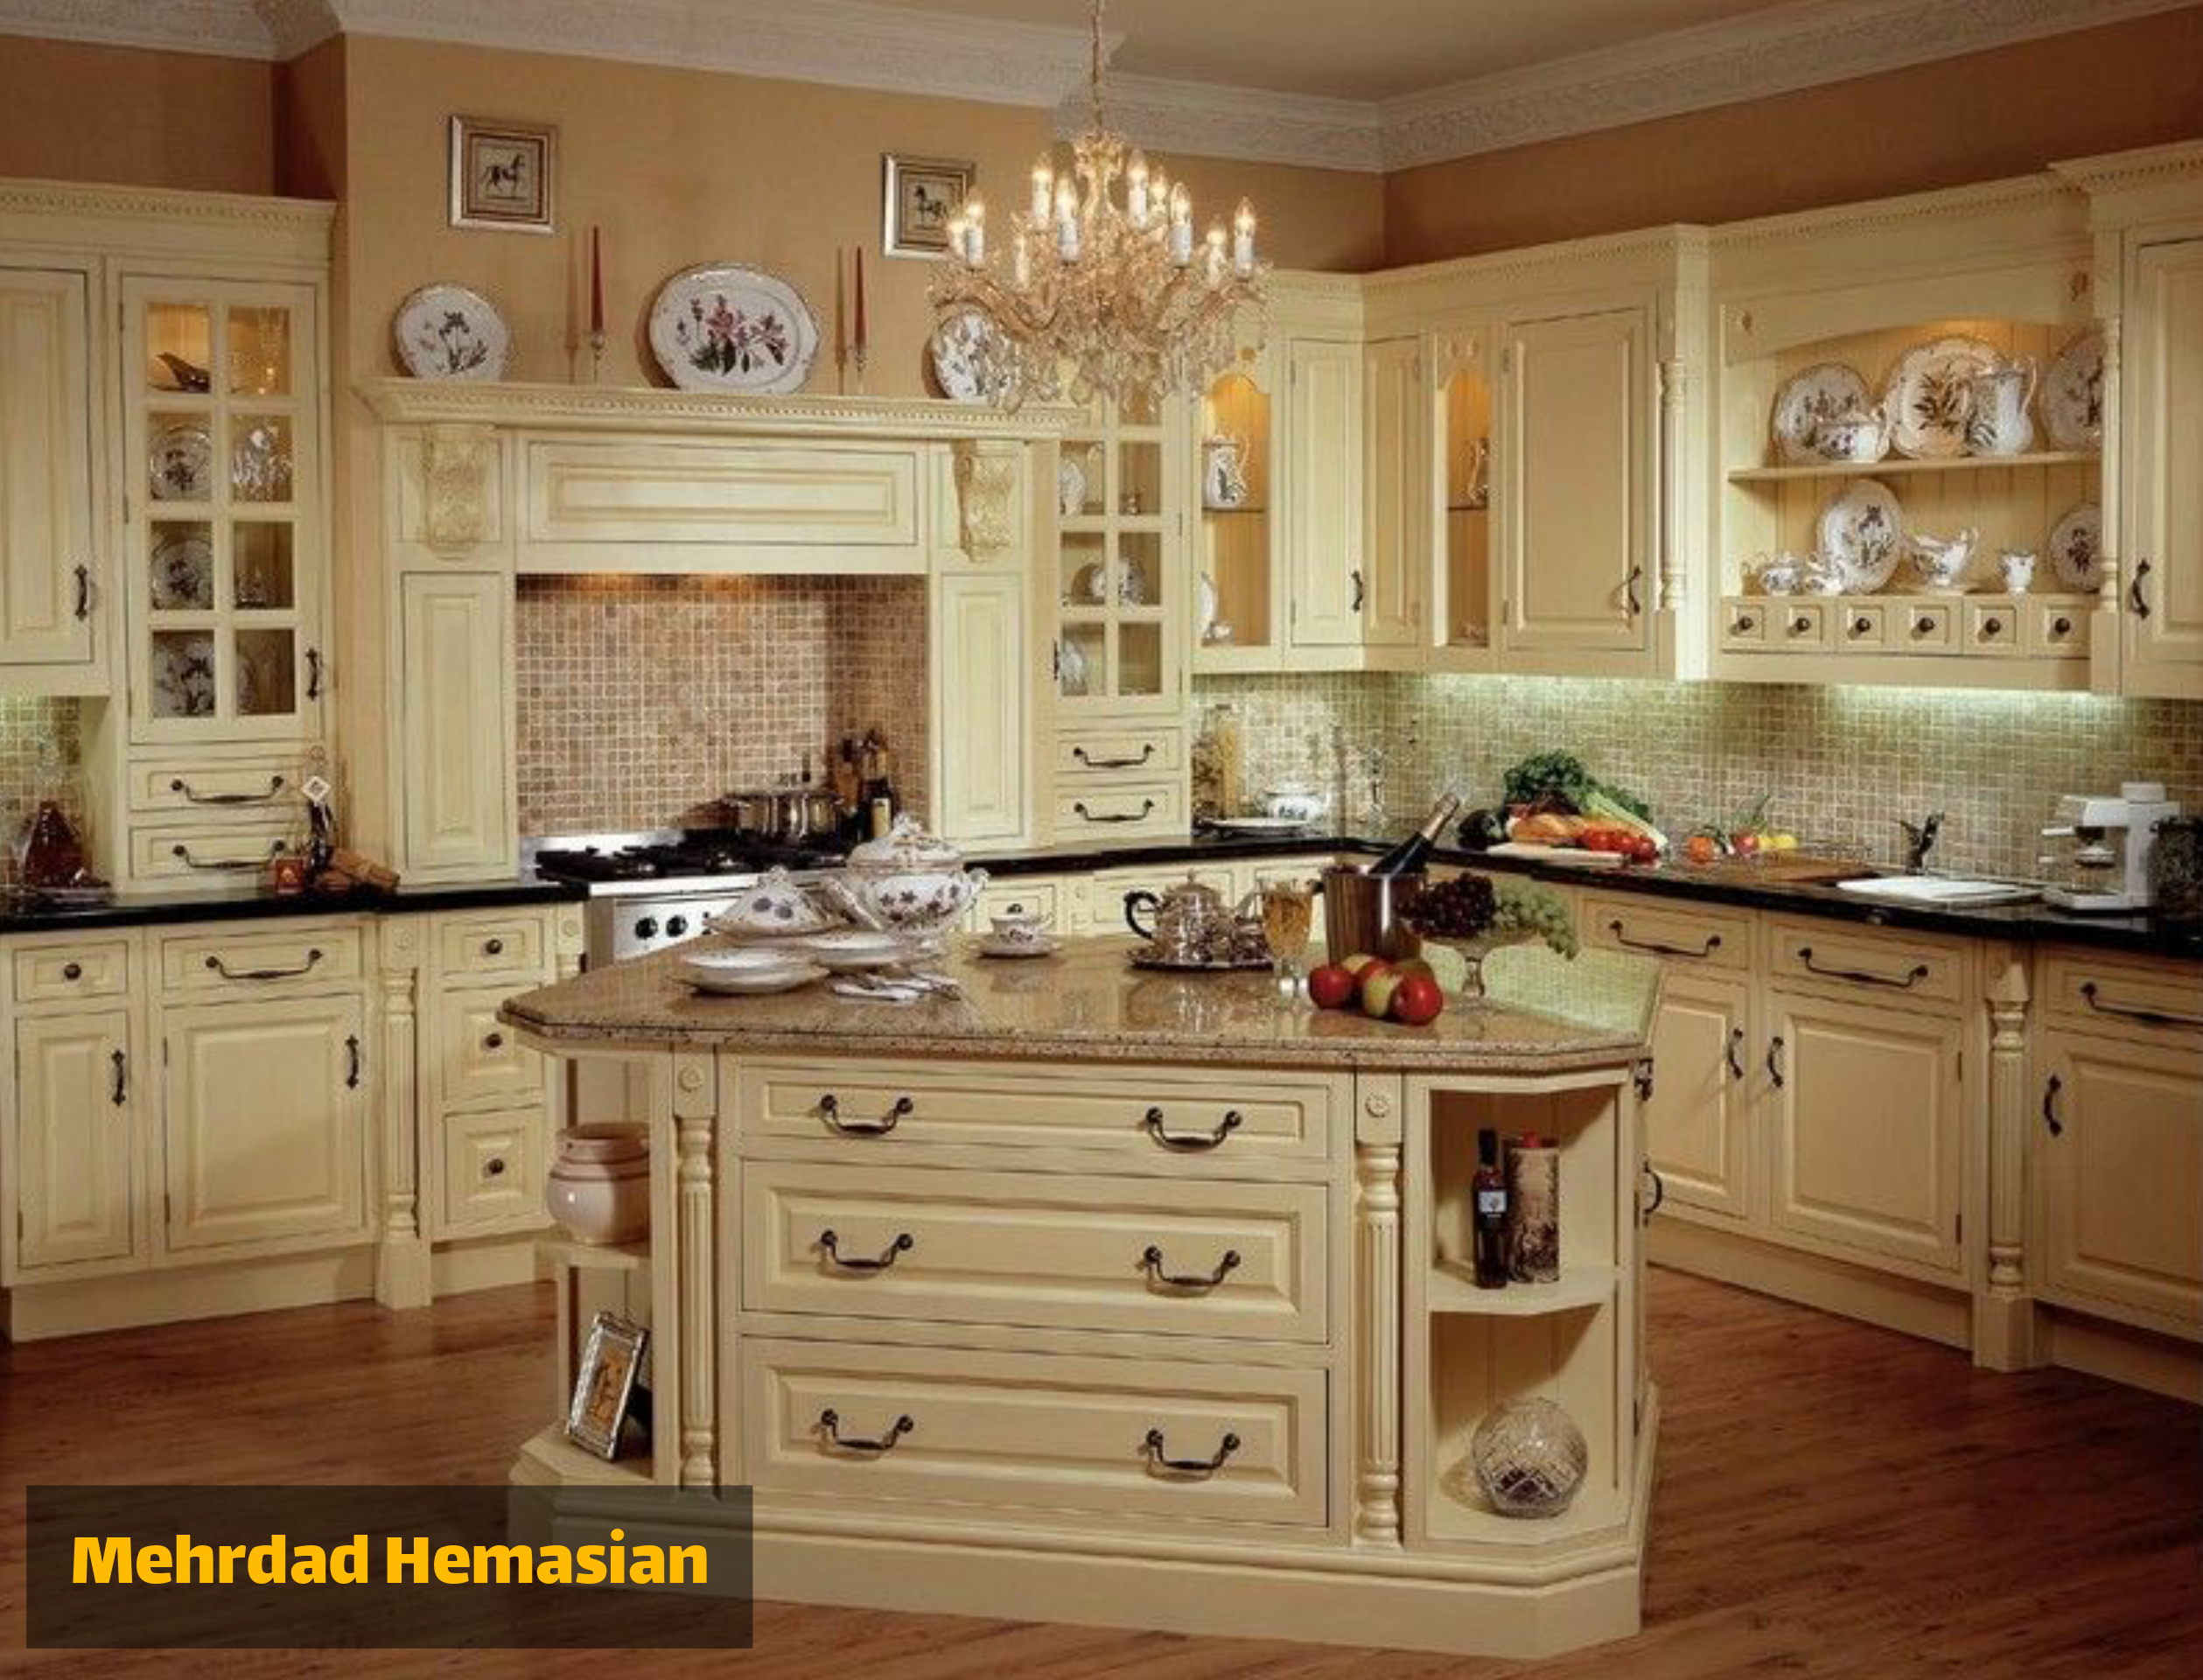 The best kitchen cabinets with natural wood and wood veneer